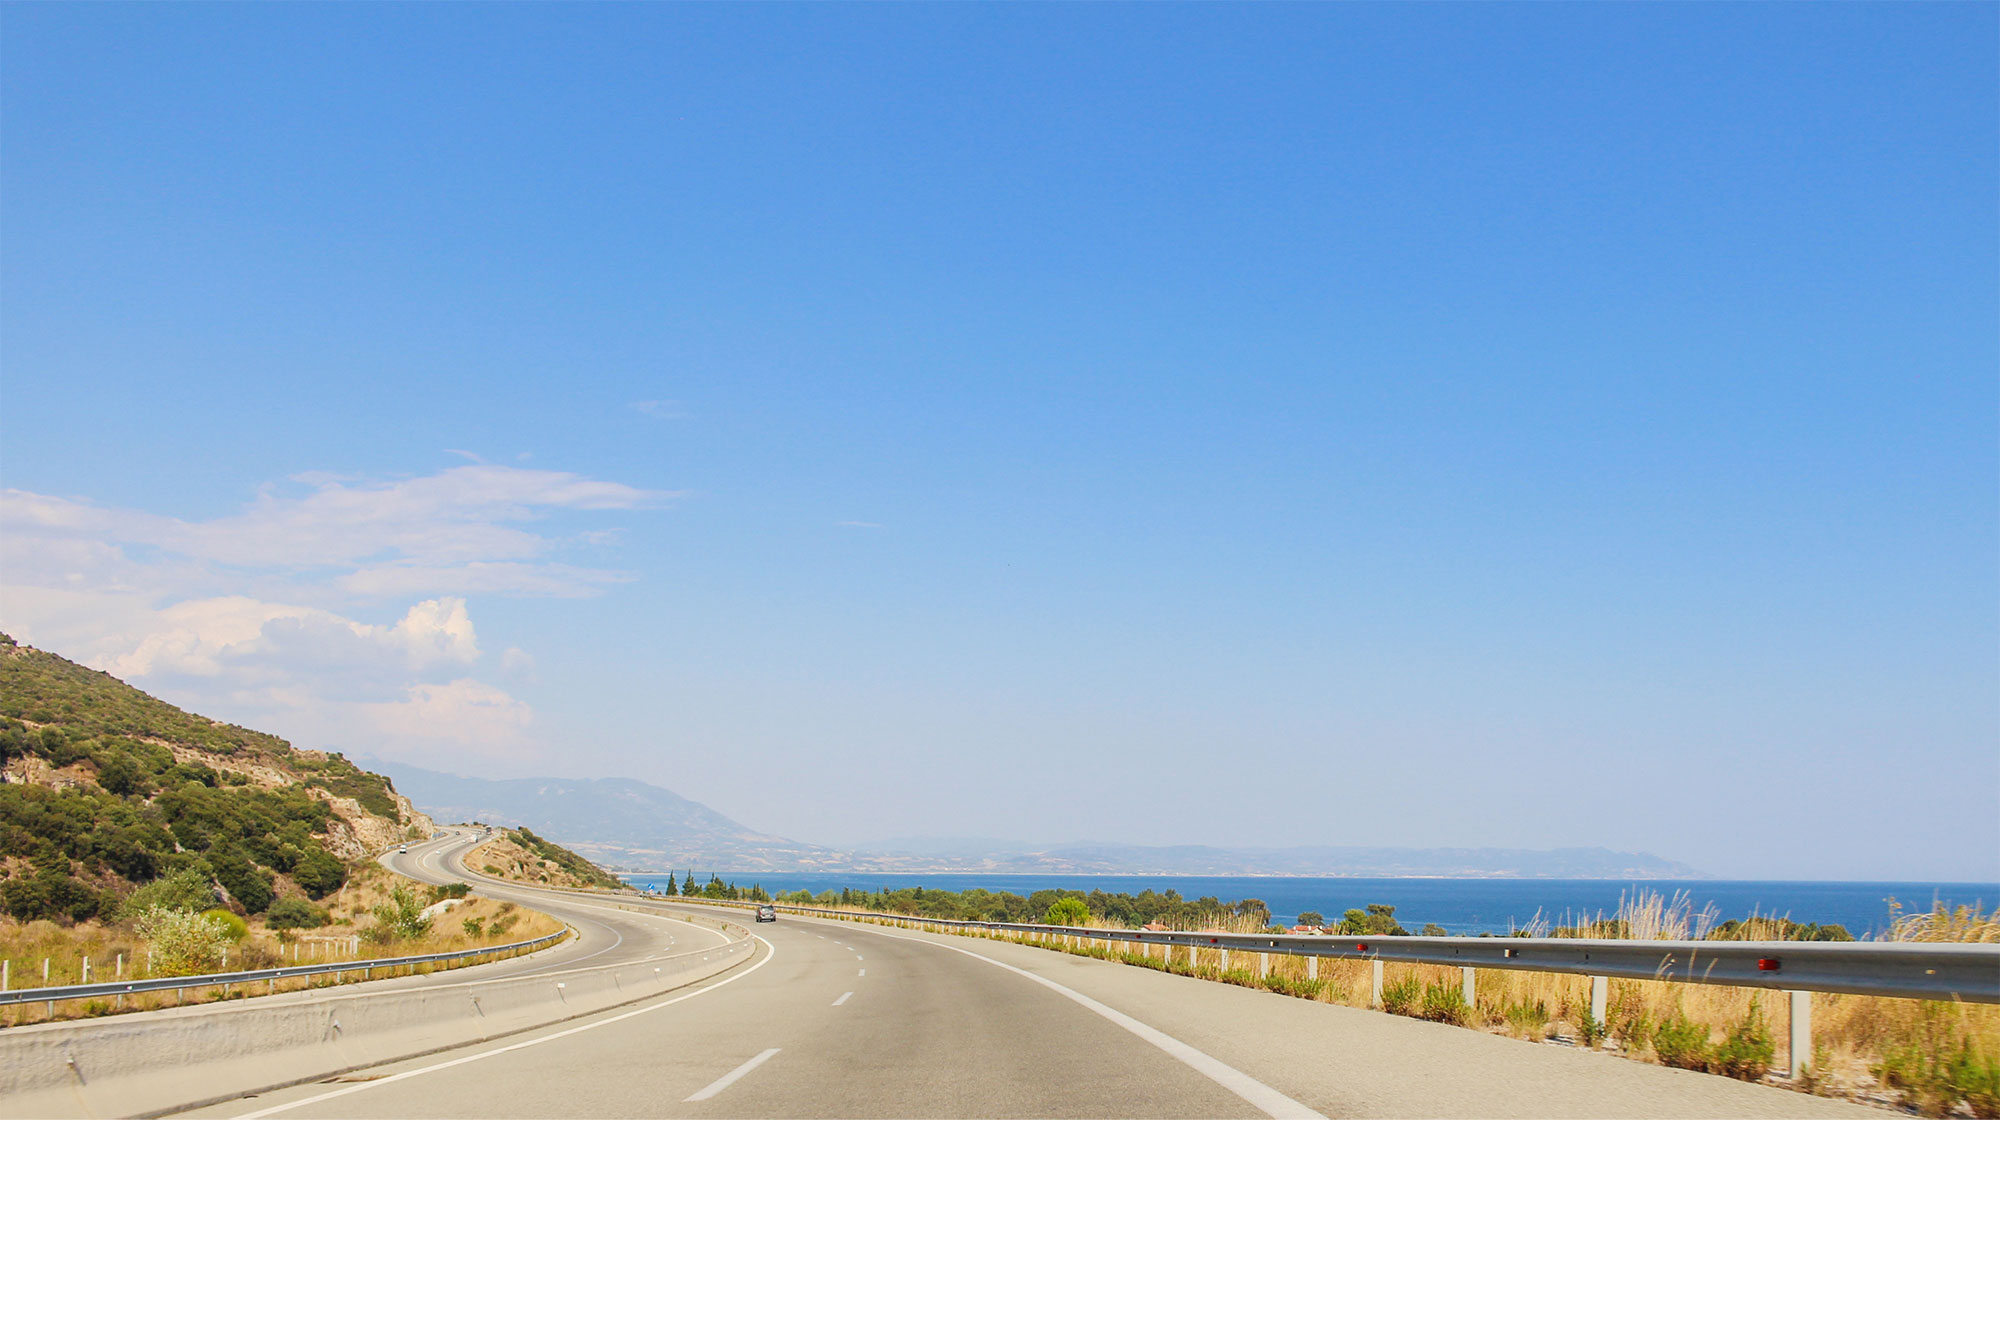 View of the Mediterranean Sea from the Road in Thessaloniki